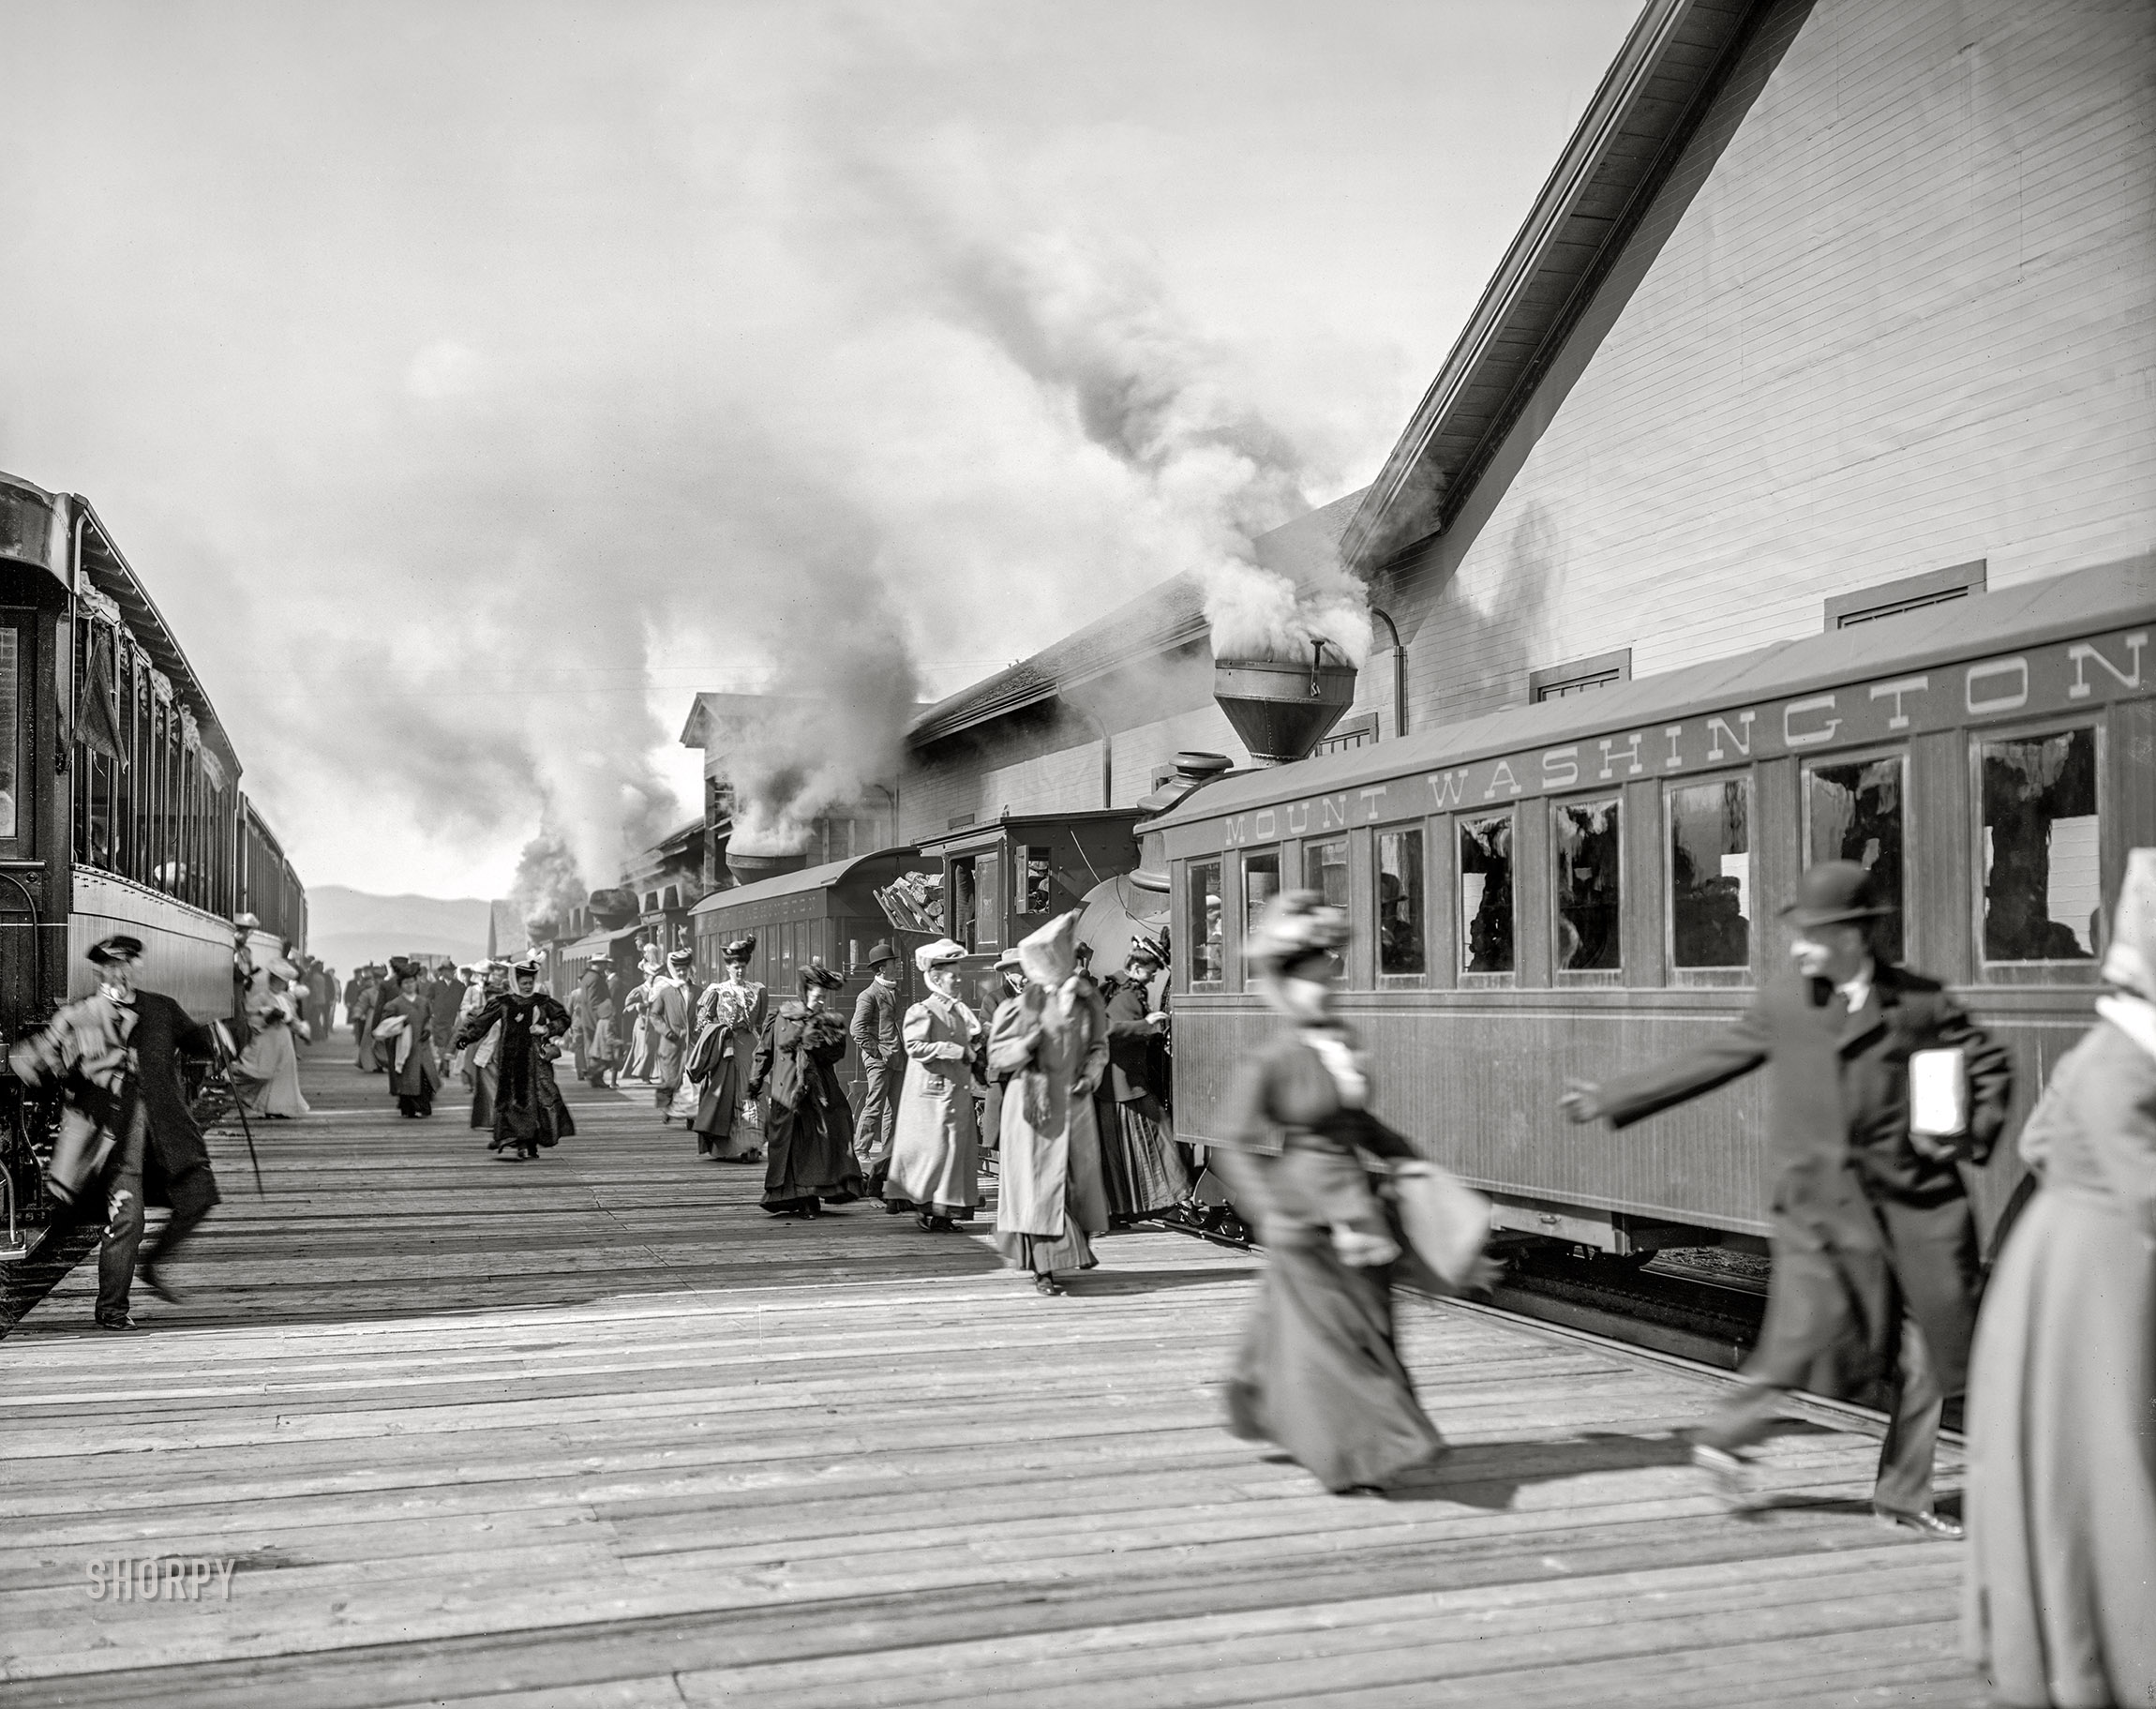 New Hampshire circa 1906. "Taking trains of Mount Washington Railway at base station, White Mountains." A cog railway to the highest peak in the Northeast. 8x10 inch dry plate glass negative, Detroit Publishing Company. View full size.